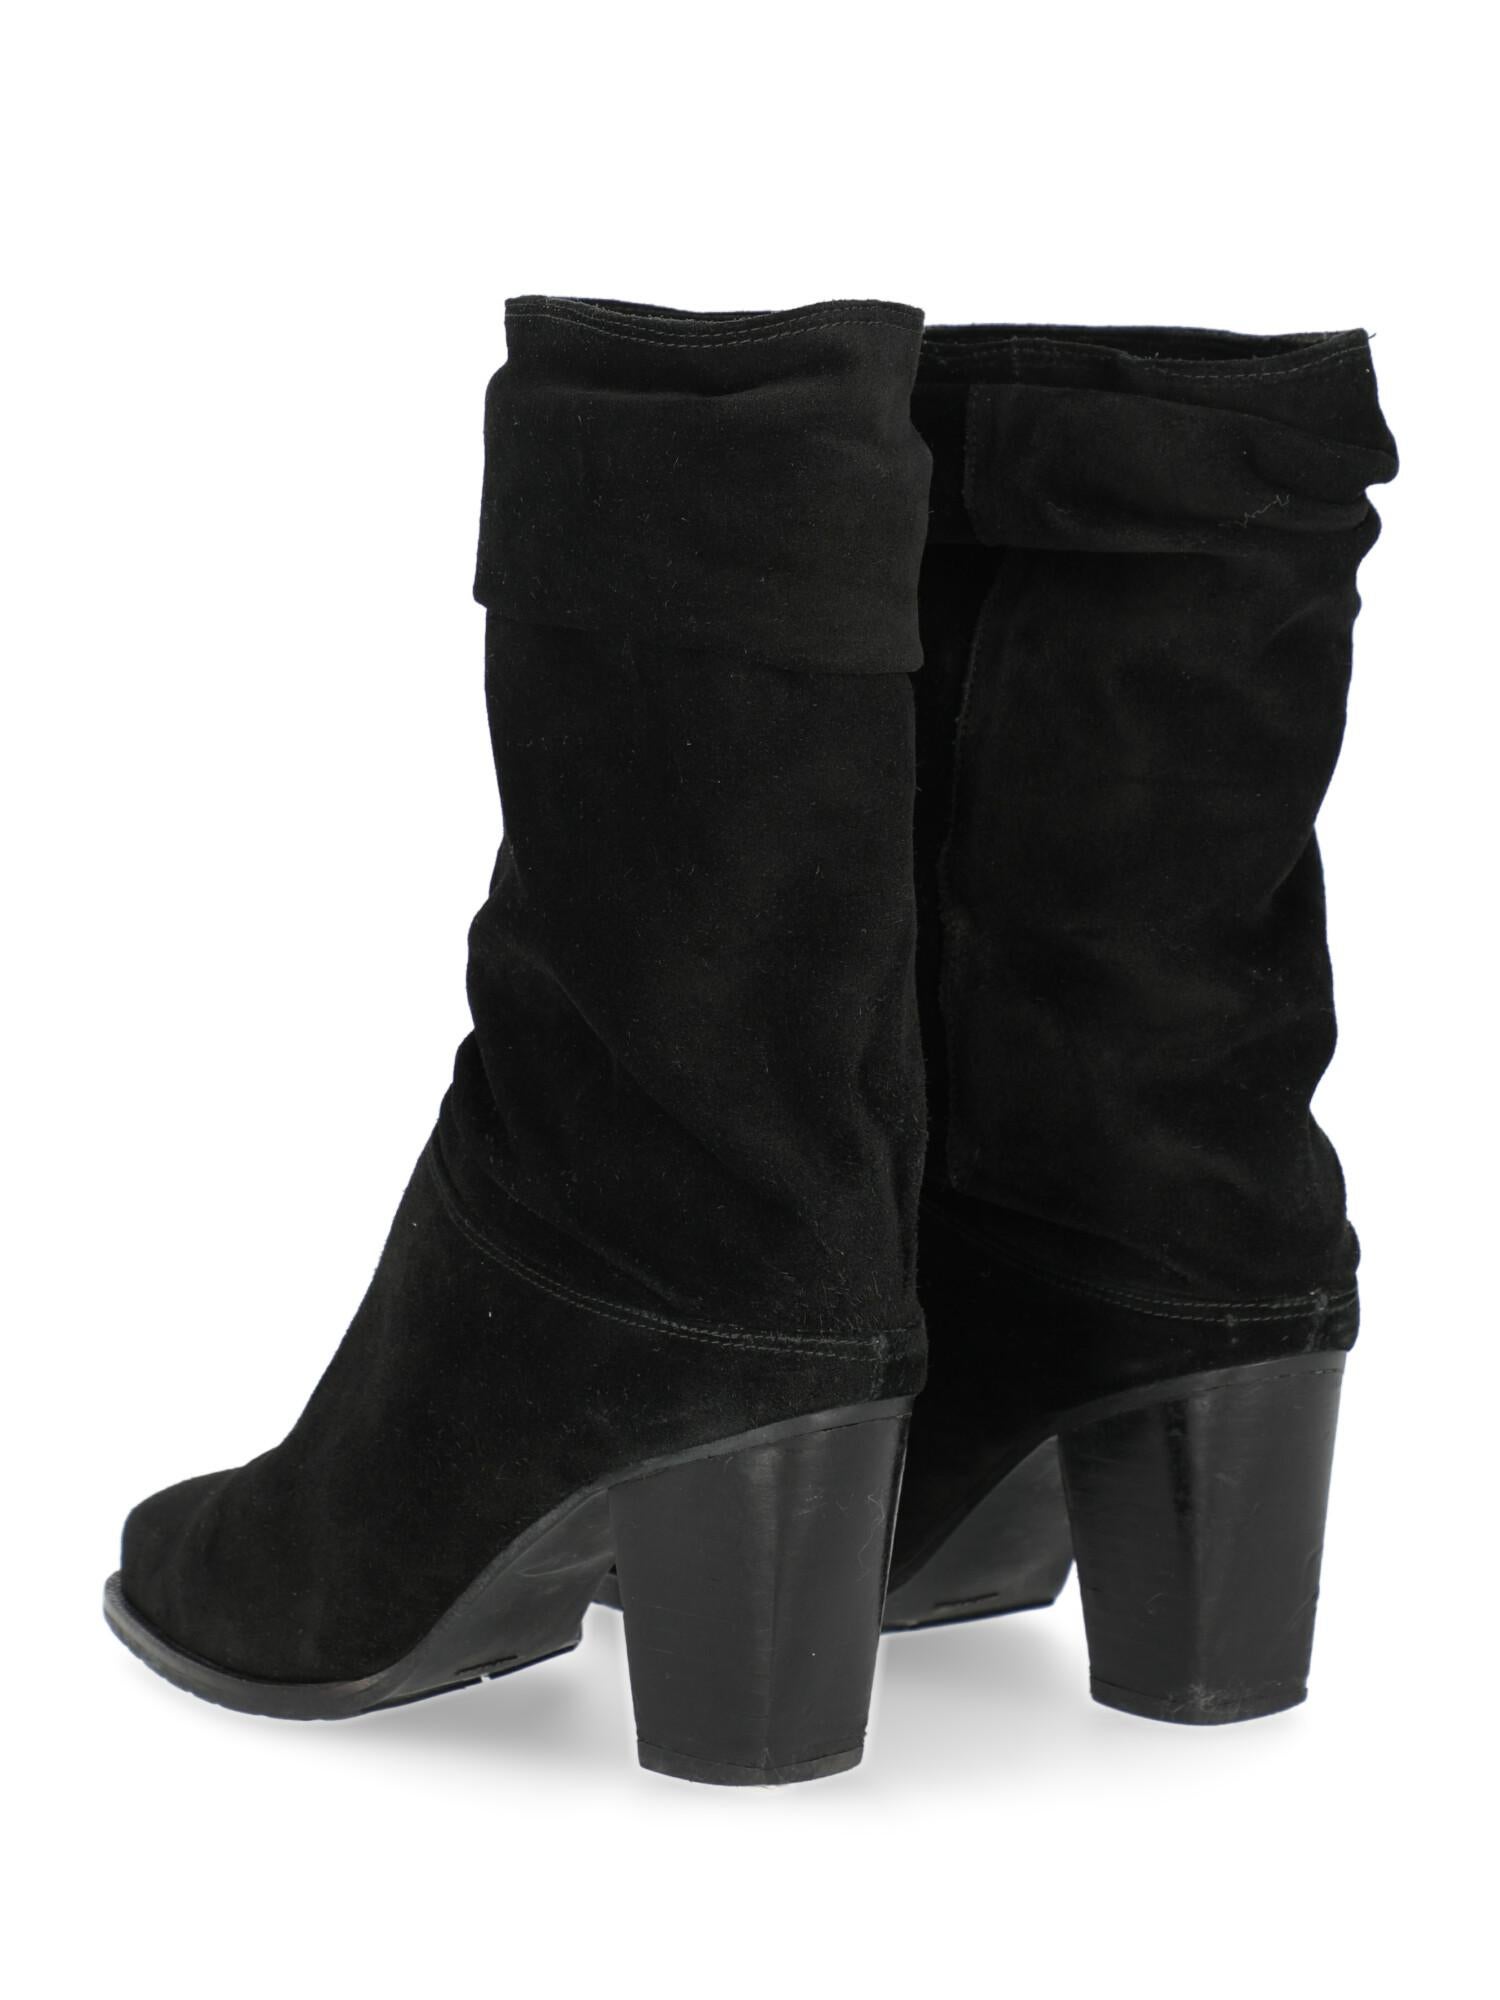 Stuart Weitzman Woman Ankle boots Black EU 36 In Fair Condition For Sale In Milan, IT